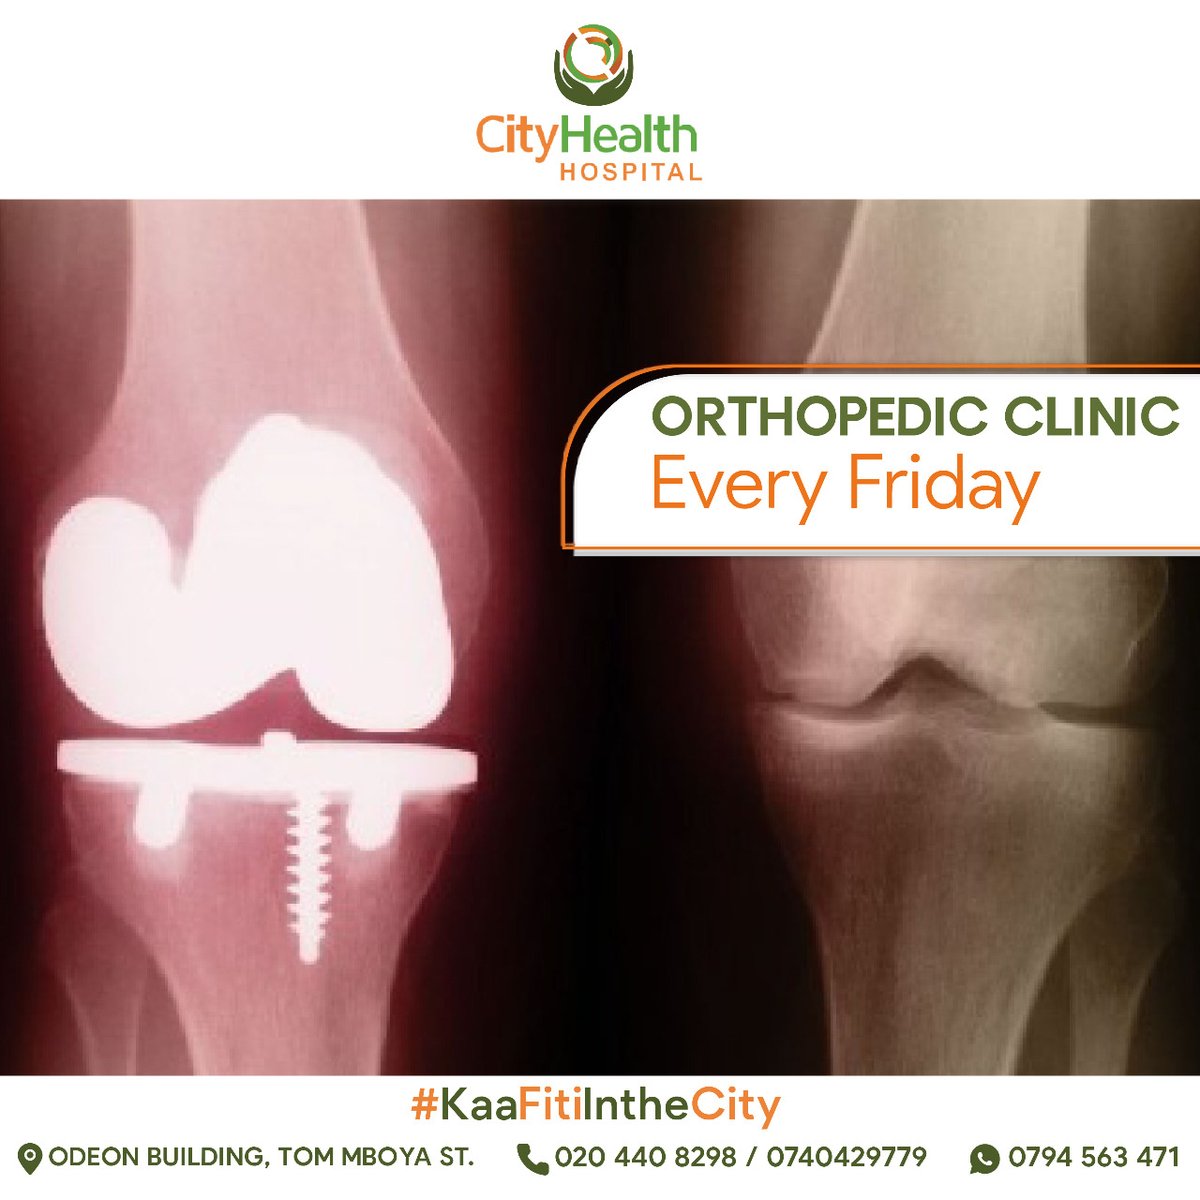 Visit us this and every Friday for quality and comprehensive care. 

#KaaFitiIntheCity #Orthopediccare